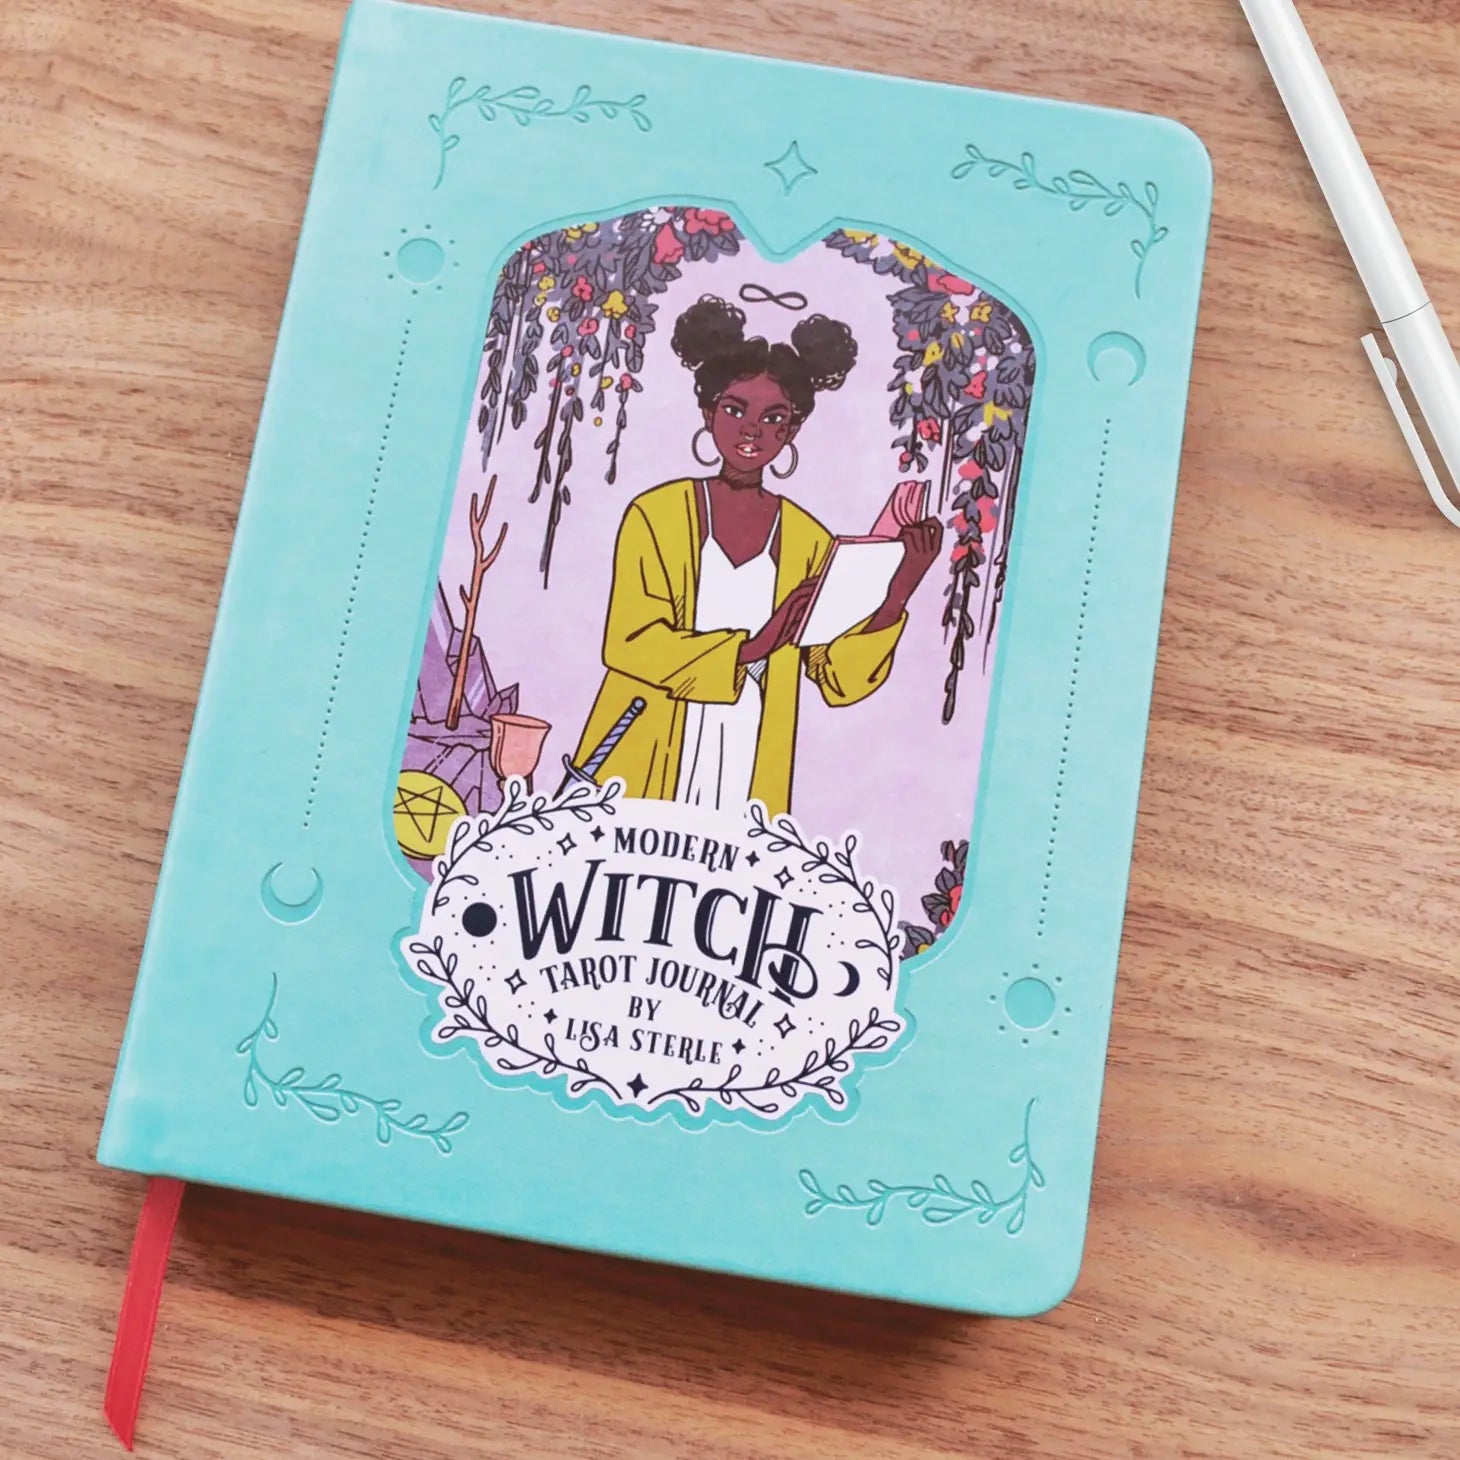 Witch Notebook - The World: Vintage Tarot Design Lined Witchy Journal  Hardcover by Studio Arcana